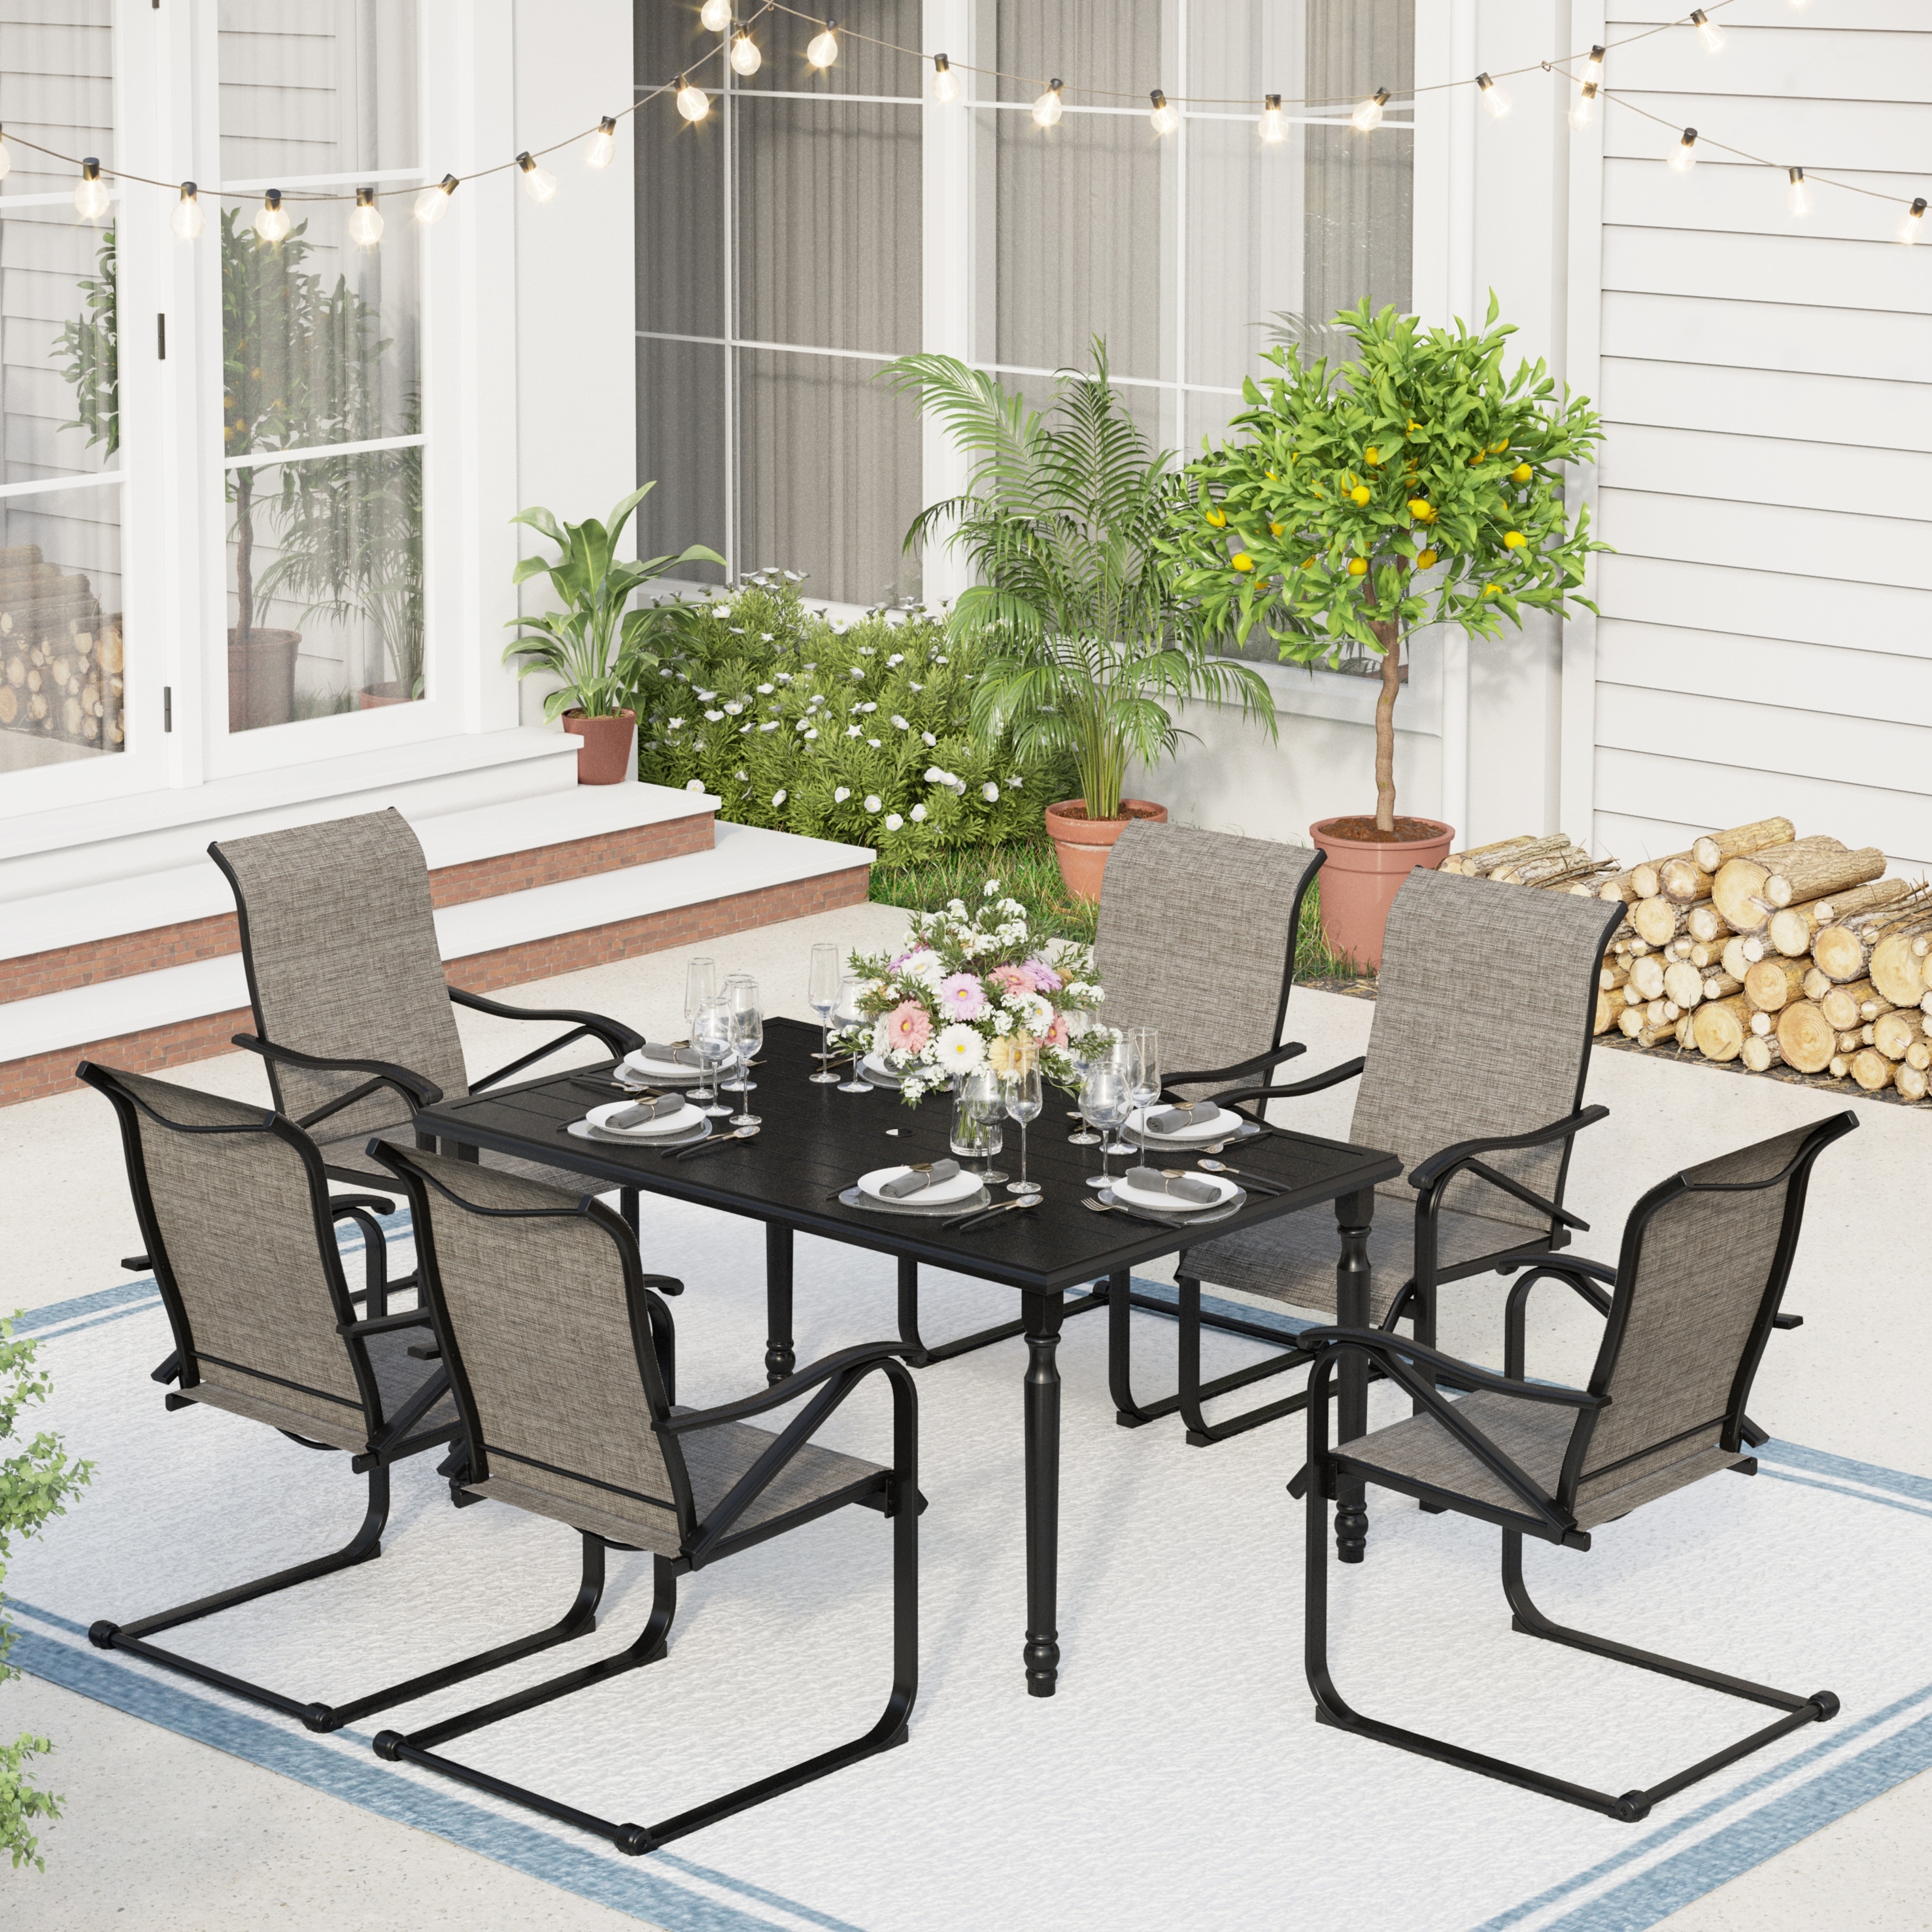 7-piece Patio Dining Sets   6 Textilene Fabirc Chairs And 1 Metal Table With Umbrella Hole